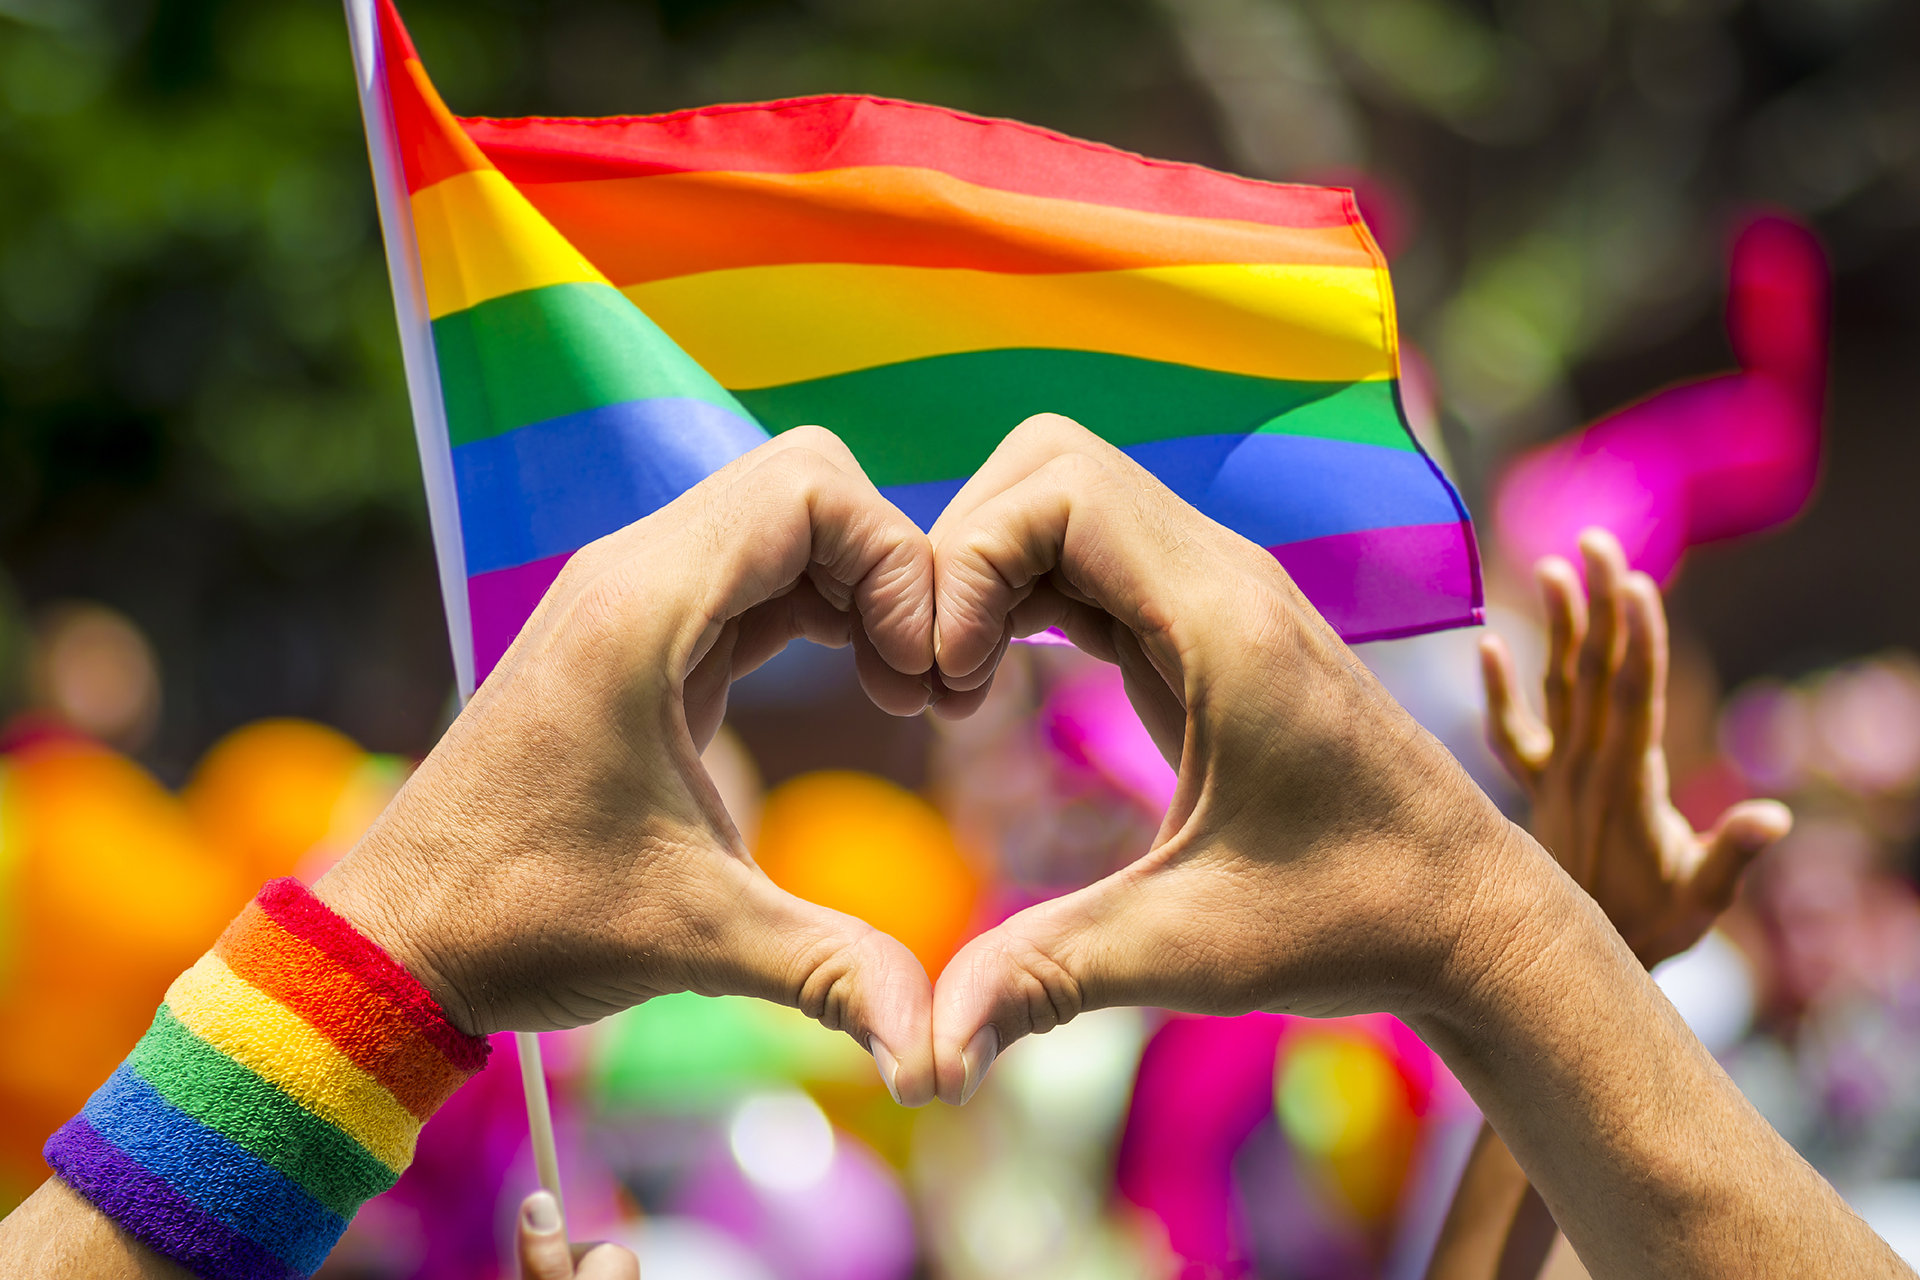 Photo of a rainbow flag during a parade with someone making a heart with his hands in the foreground